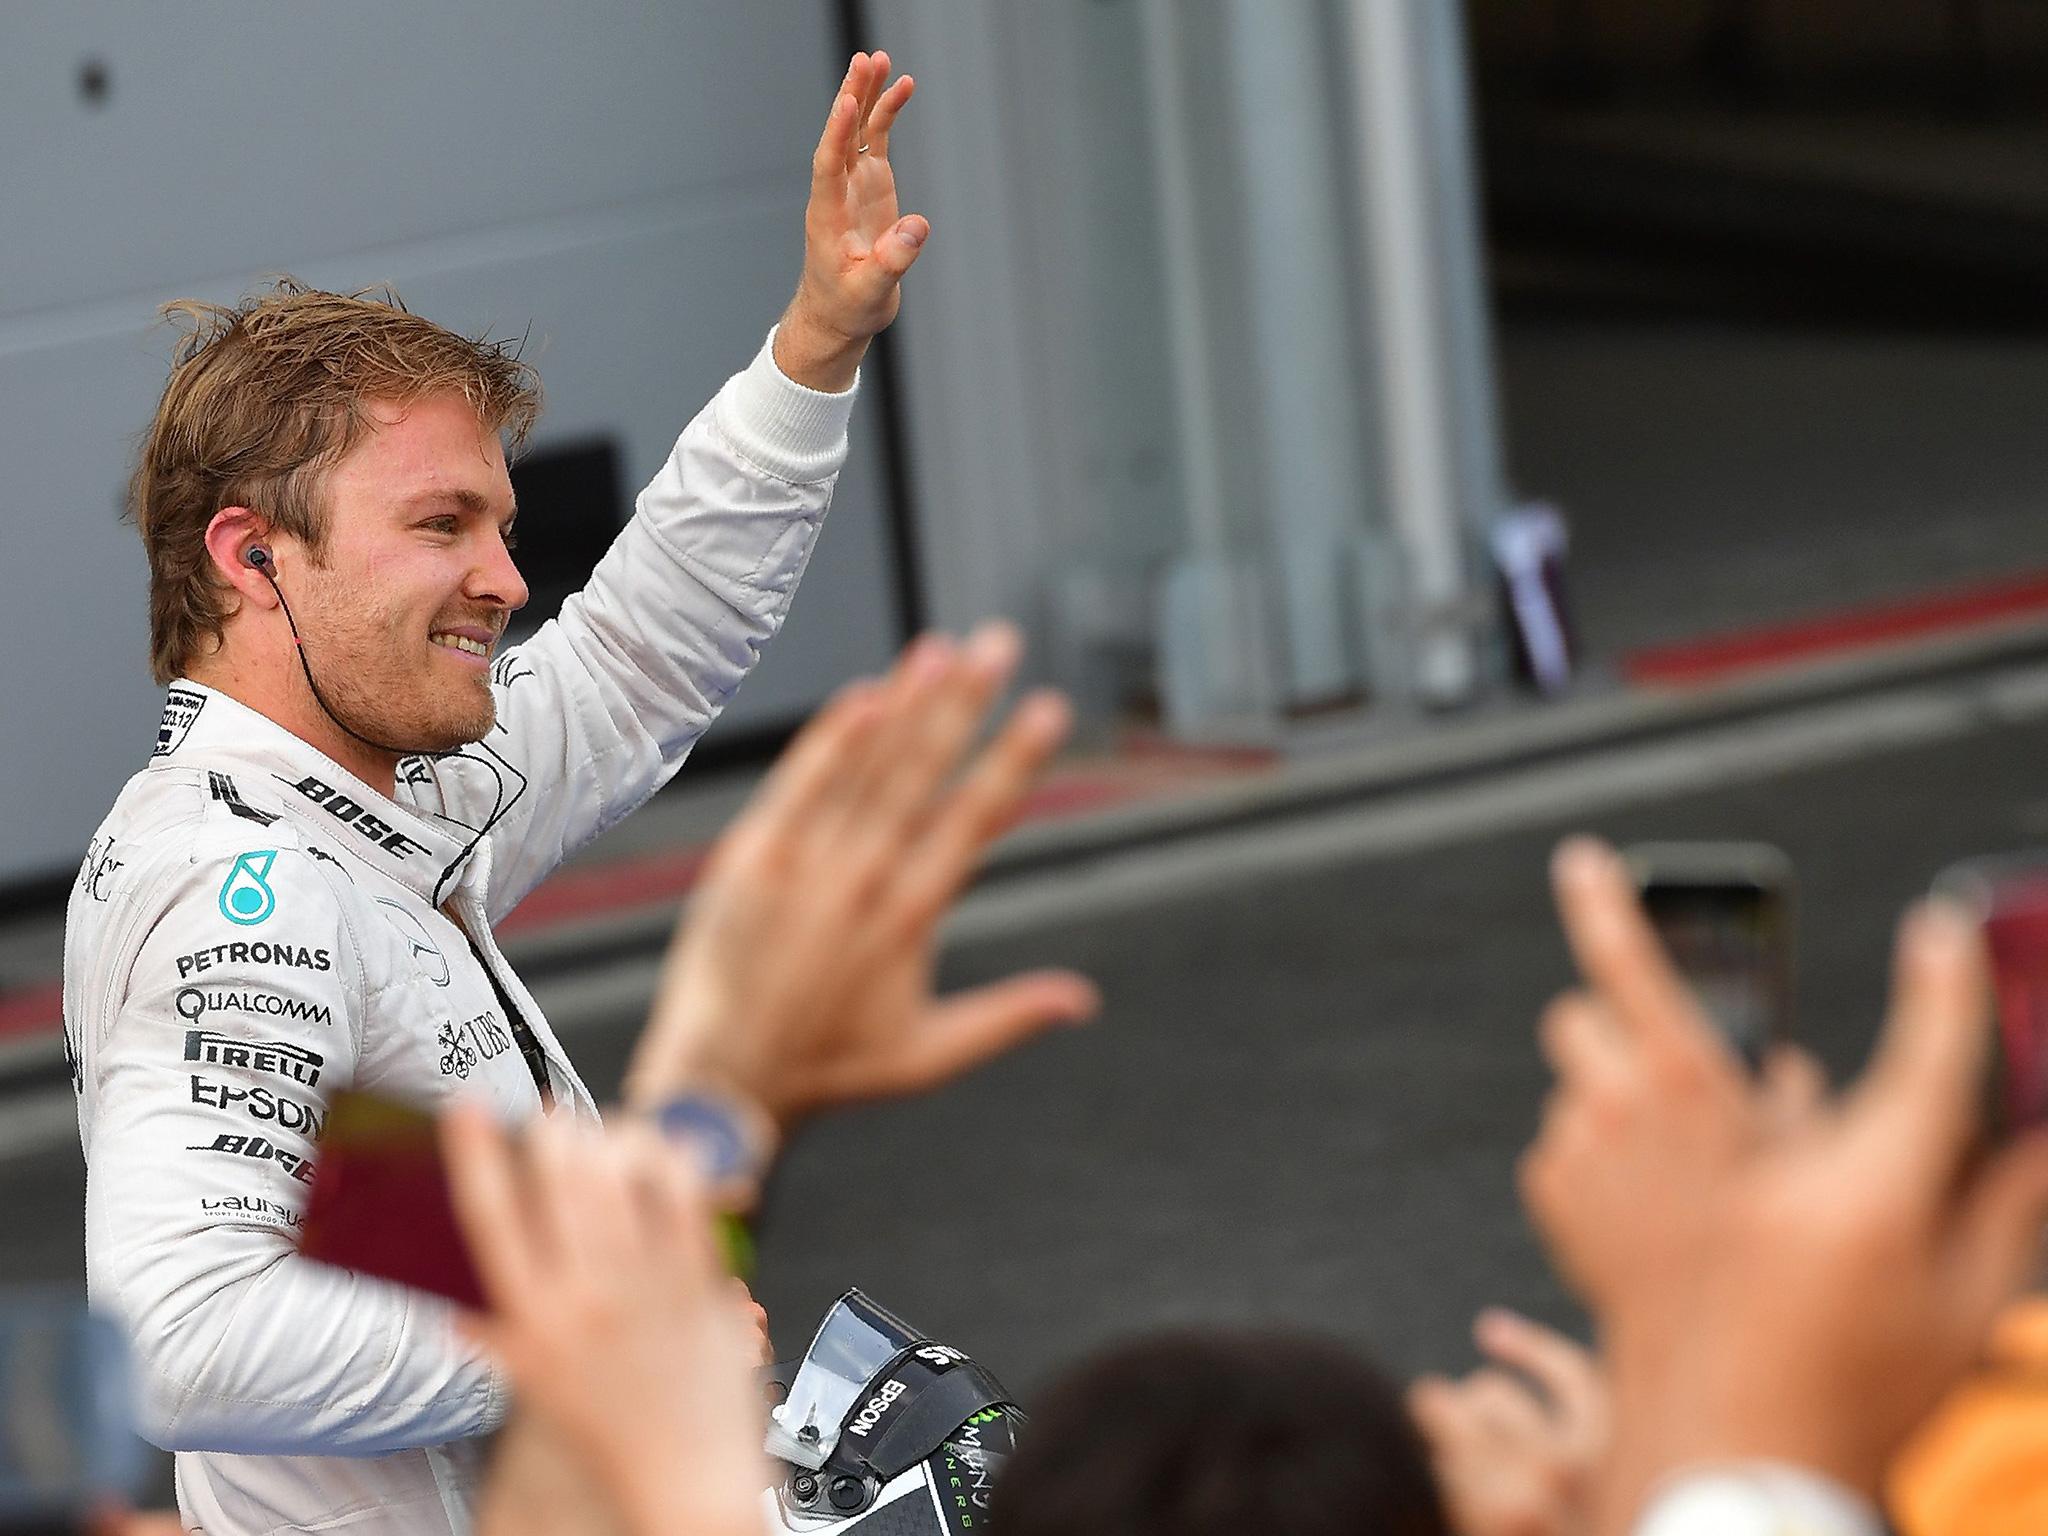 Rosberg cruised to his fifth victory of the season